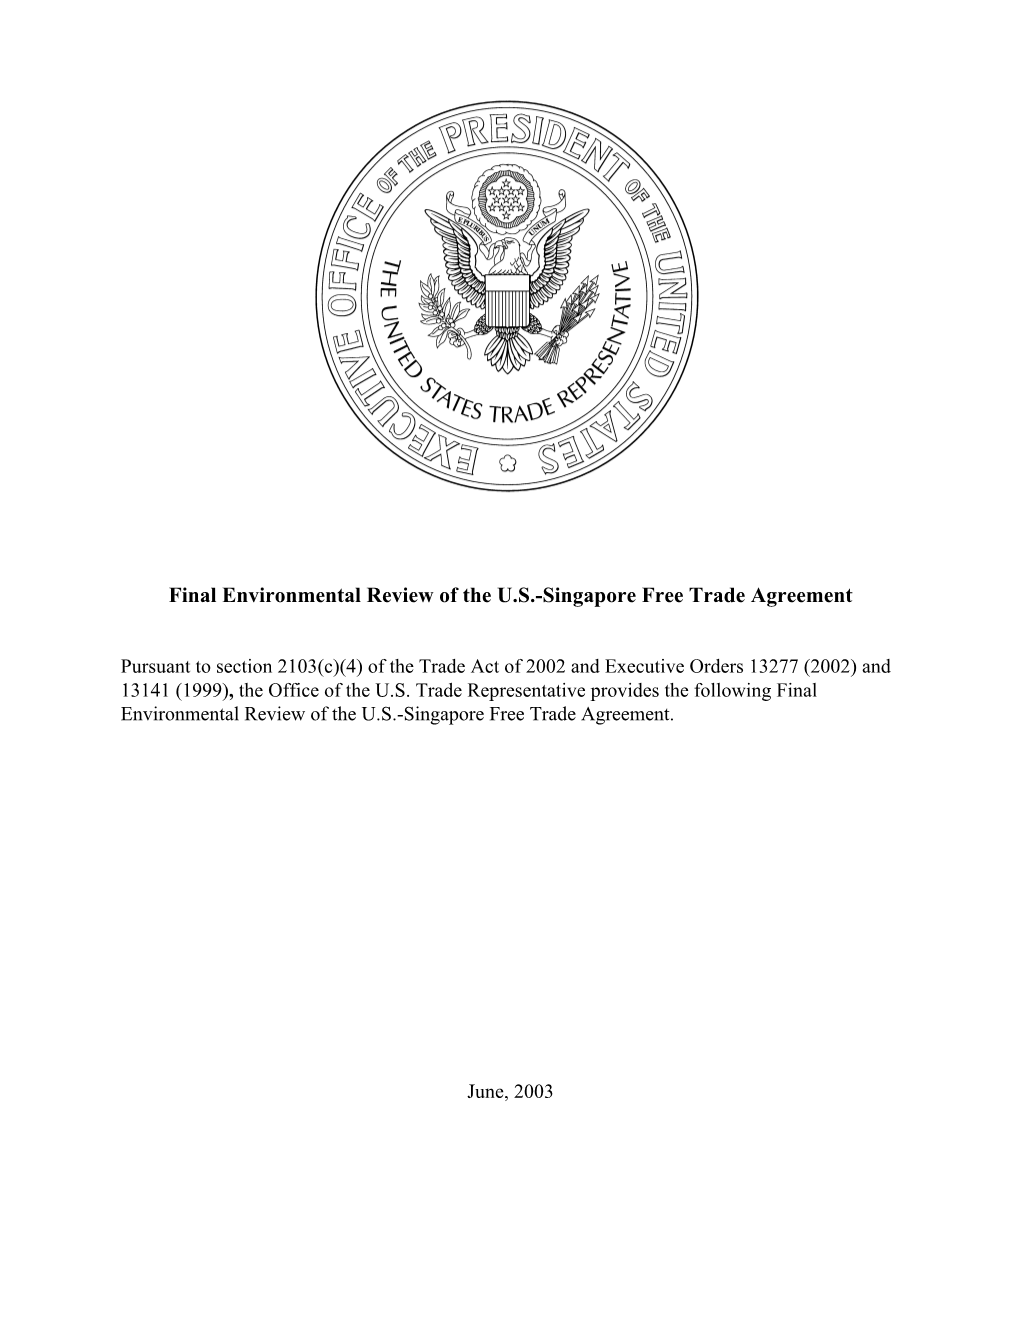 Final Environmental Review of the U.S.-Singapore Free Trade Agreement